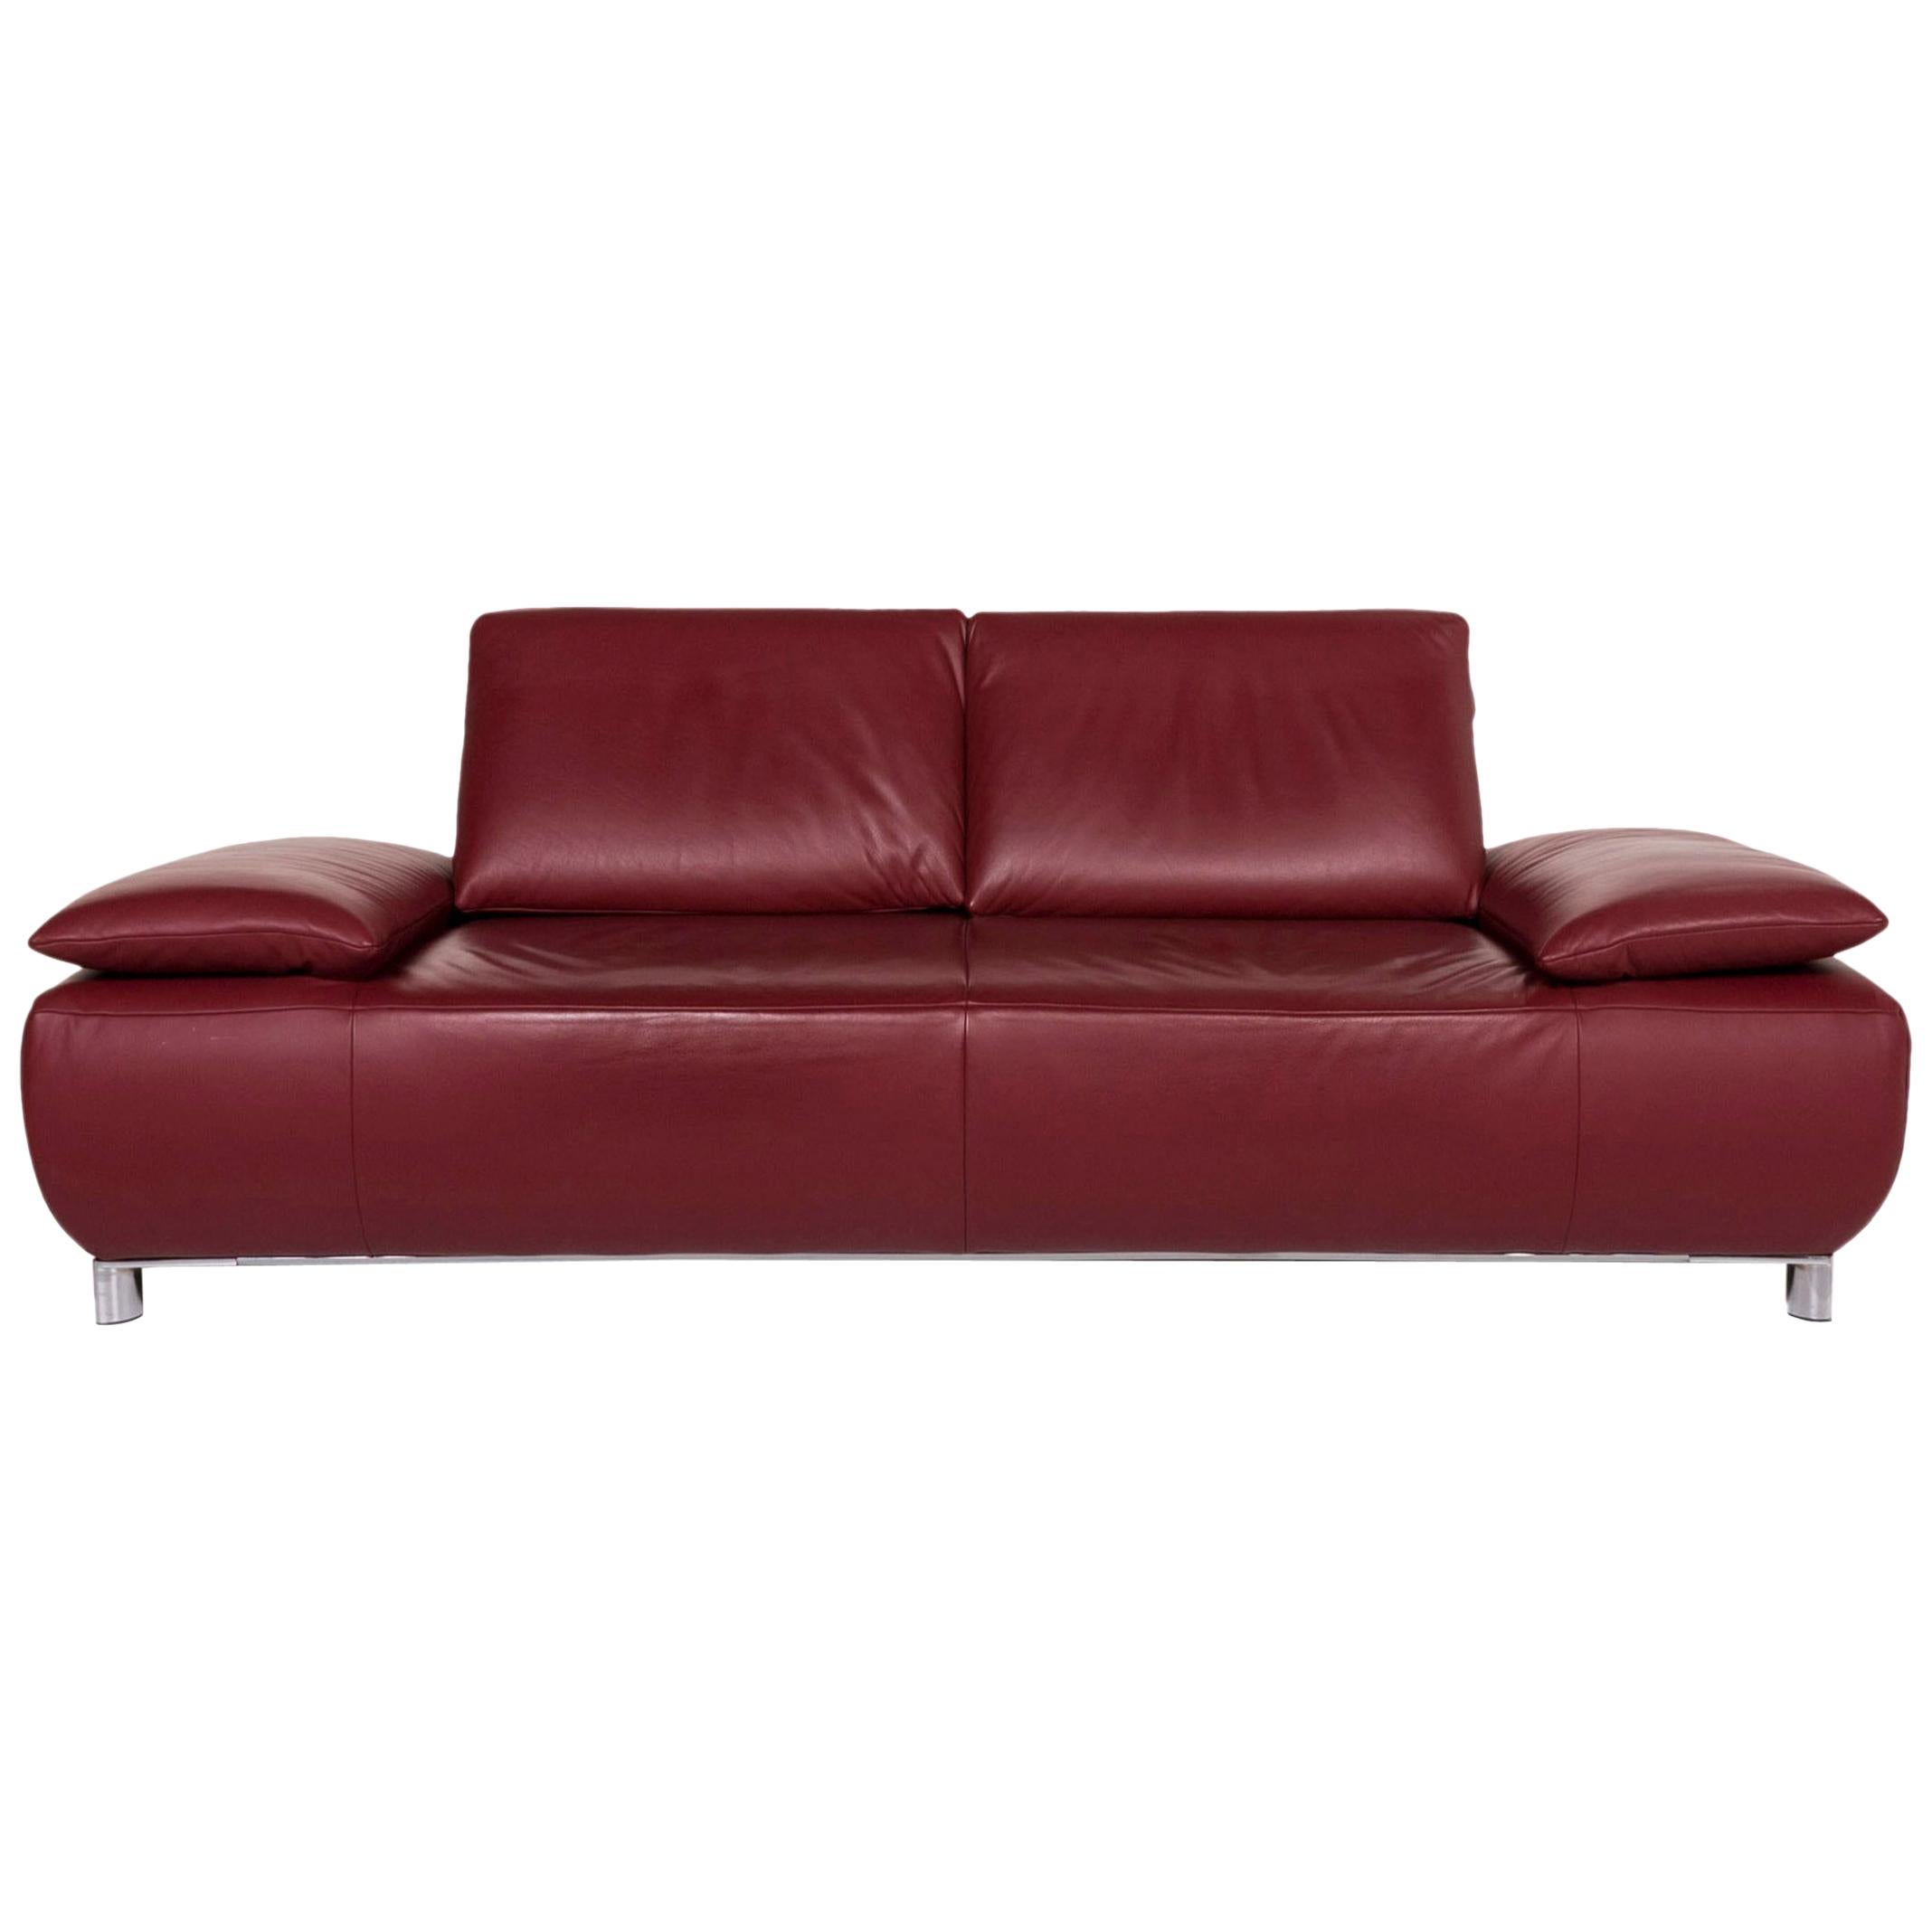 Koinor Volare Leather Sofa Red Two-Seat Function Couch